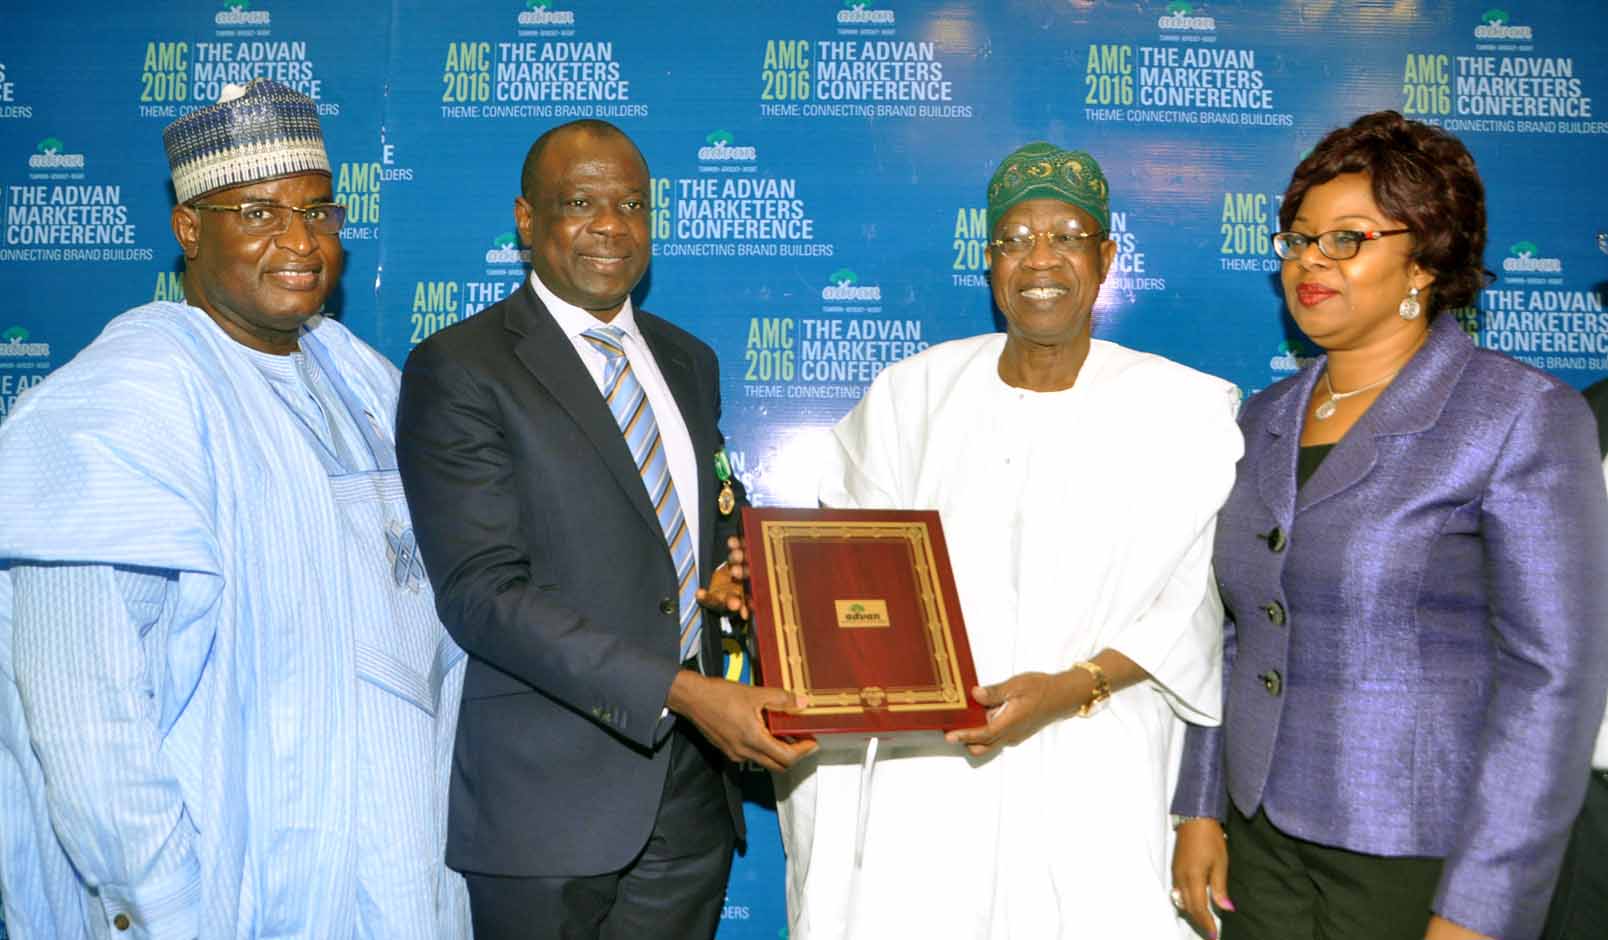 From Left: Alhaji Garba Bello Kankarofi, APCON Registrar, Mr David Okeme, President Advertisers Association Of Nigeria (ADVAN) Alhaji Lai Mohammed, Hon Minister of Information and Culture and Mrs Johan Ihekwaba, General Manager Marketing UAC Foods Nigeria at the 2016 Advertisers Association of Nigeria (ADVAN) Marketers Conference with the theme: Connecting Brand Builders held at Sheraton hotel Ikeja, Lagos.